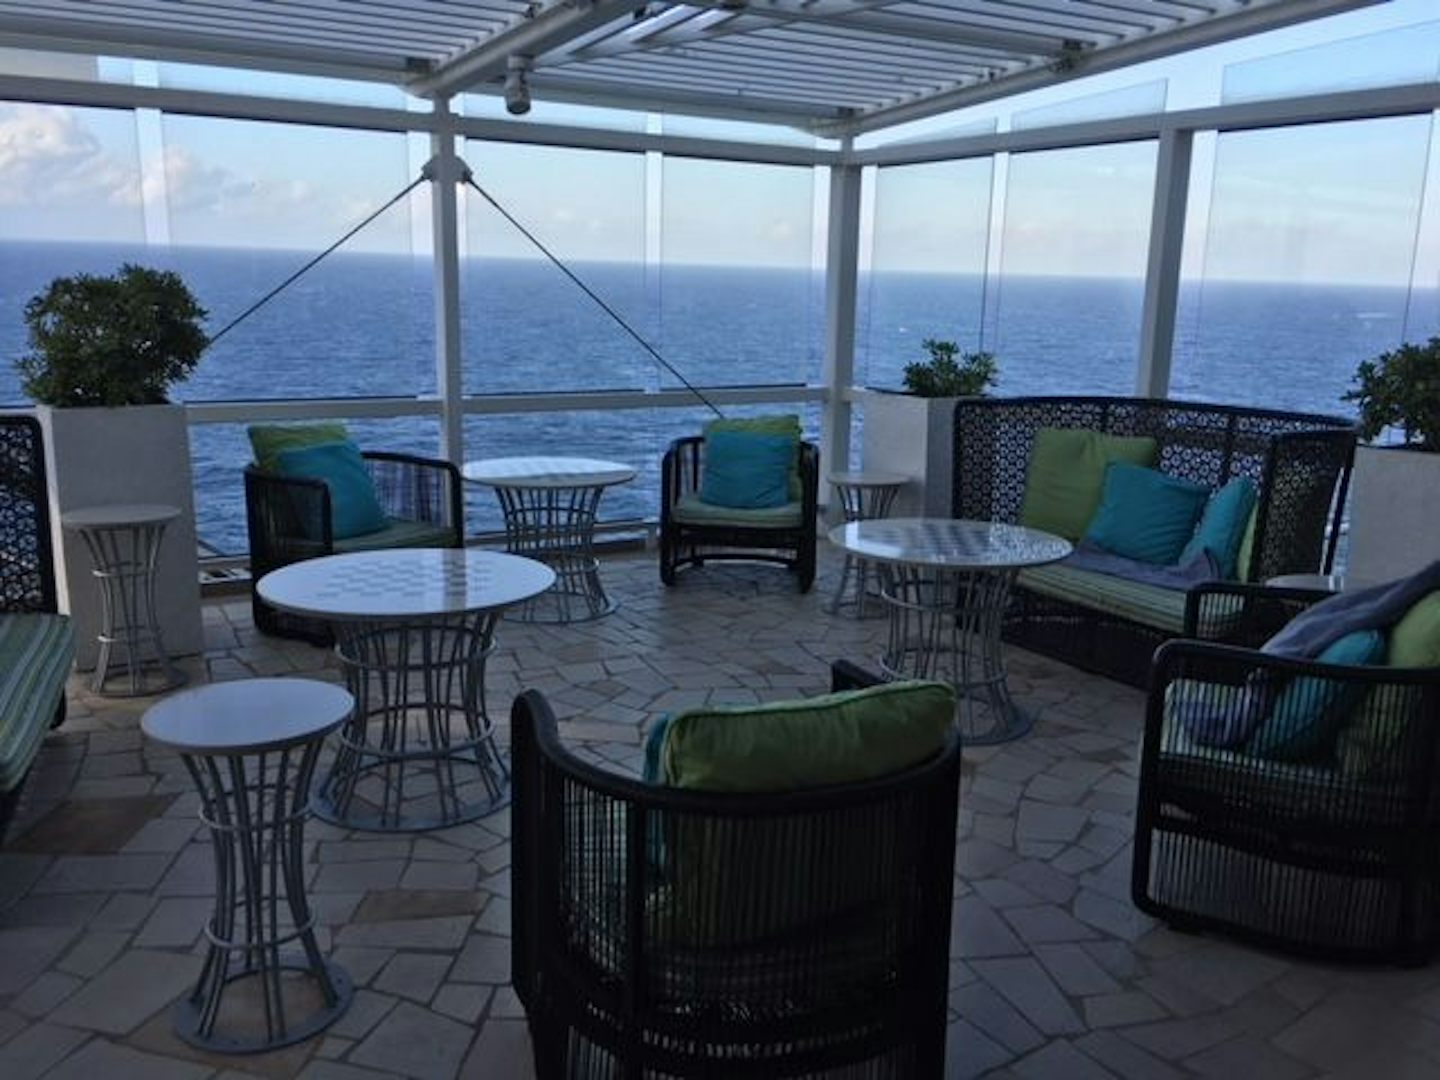 A great place to relax on Deck 15 near the Lawn Club Grill